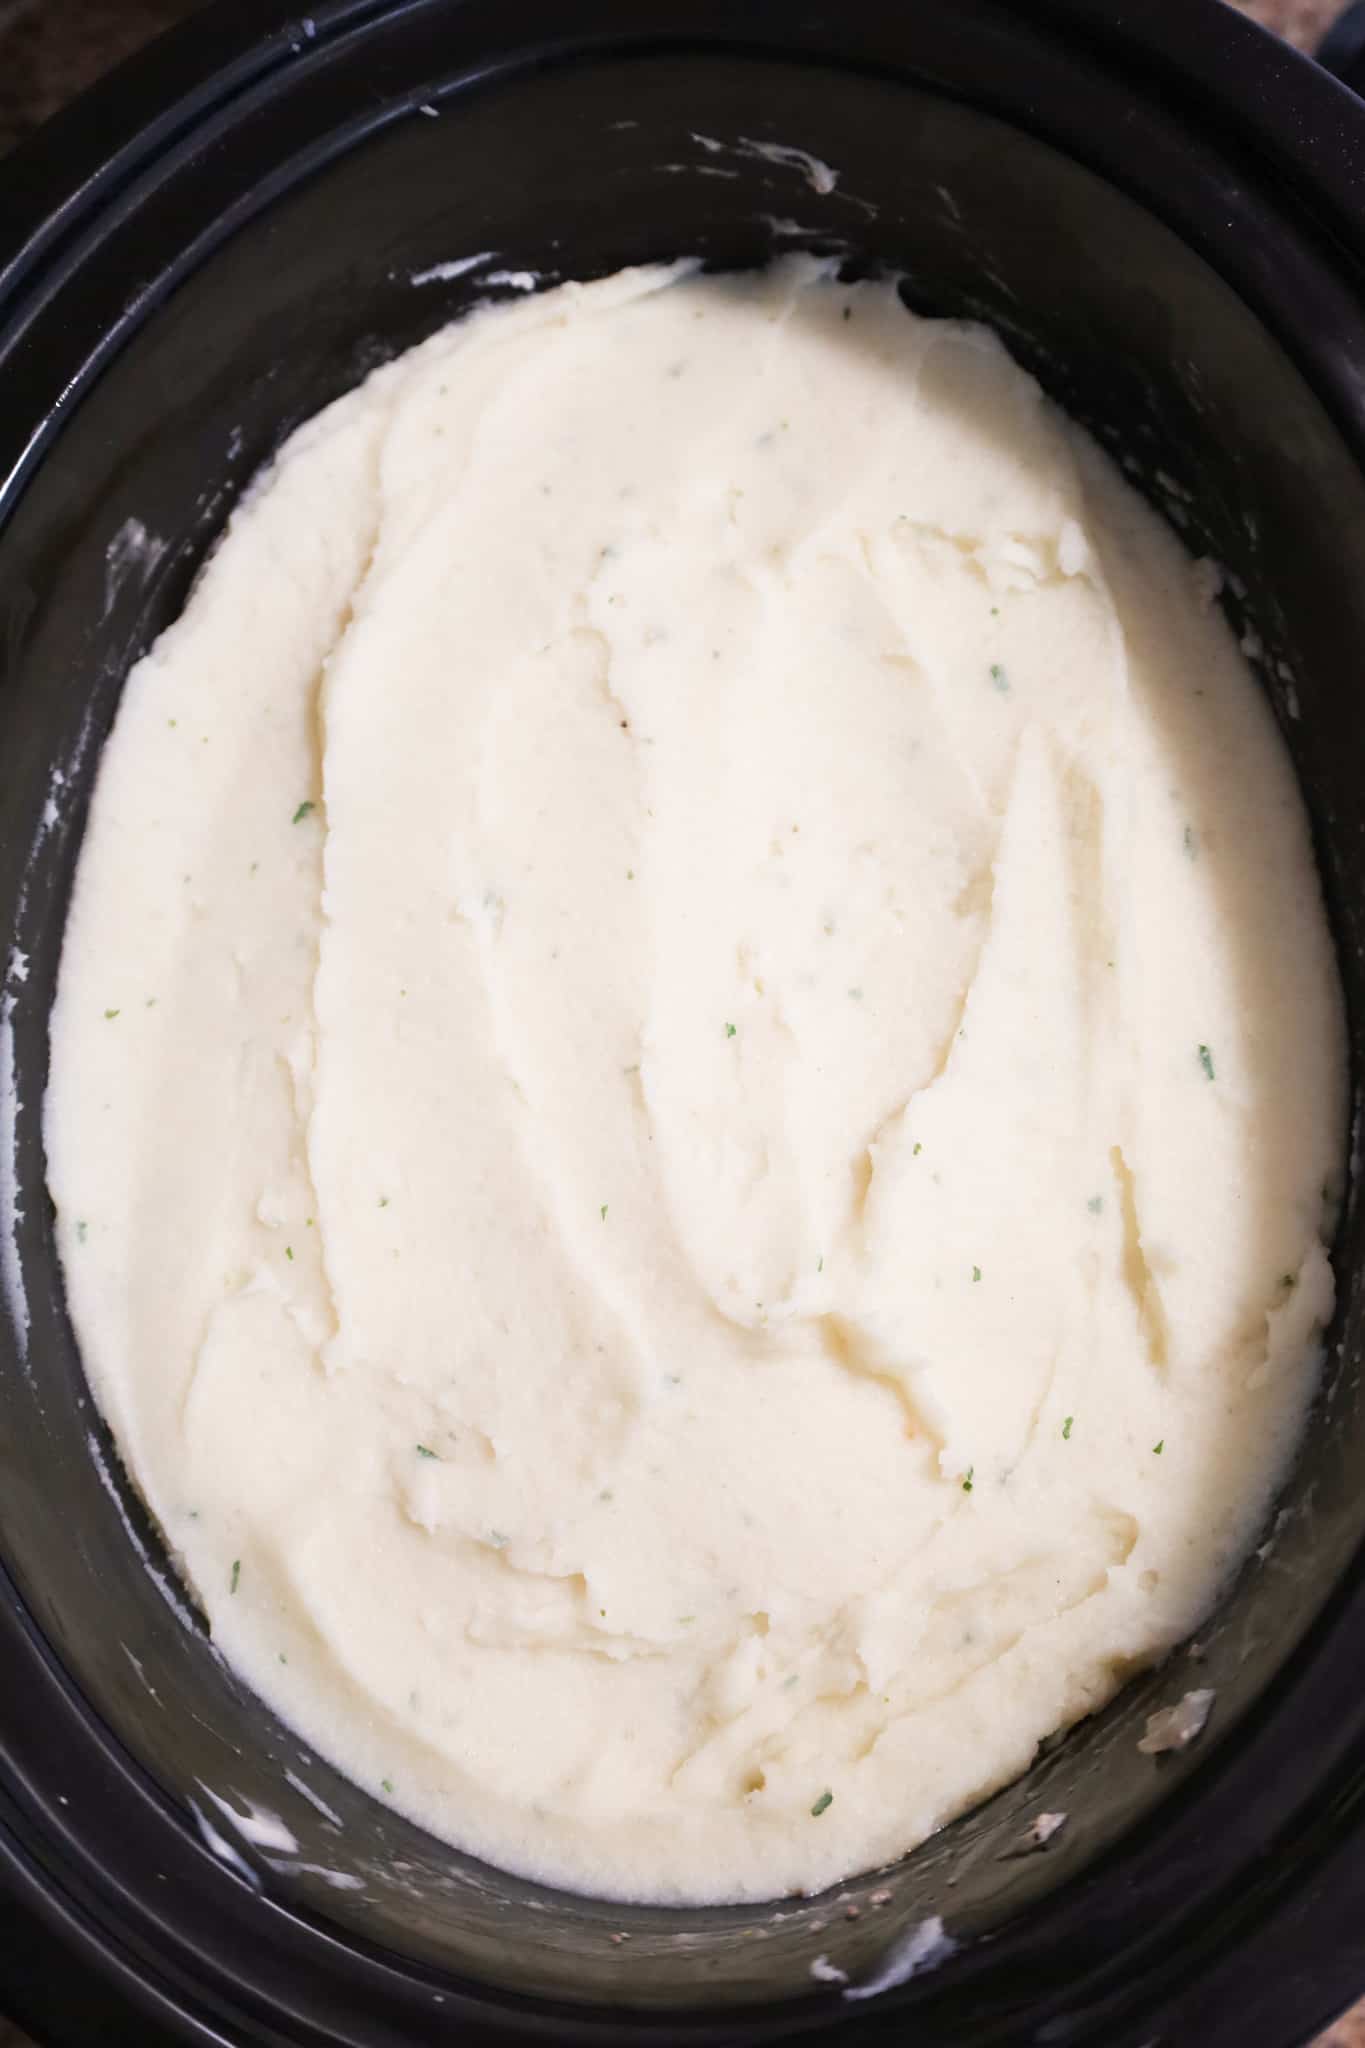 mashed potatoes spread on top of ground beef mixture in a crock pot